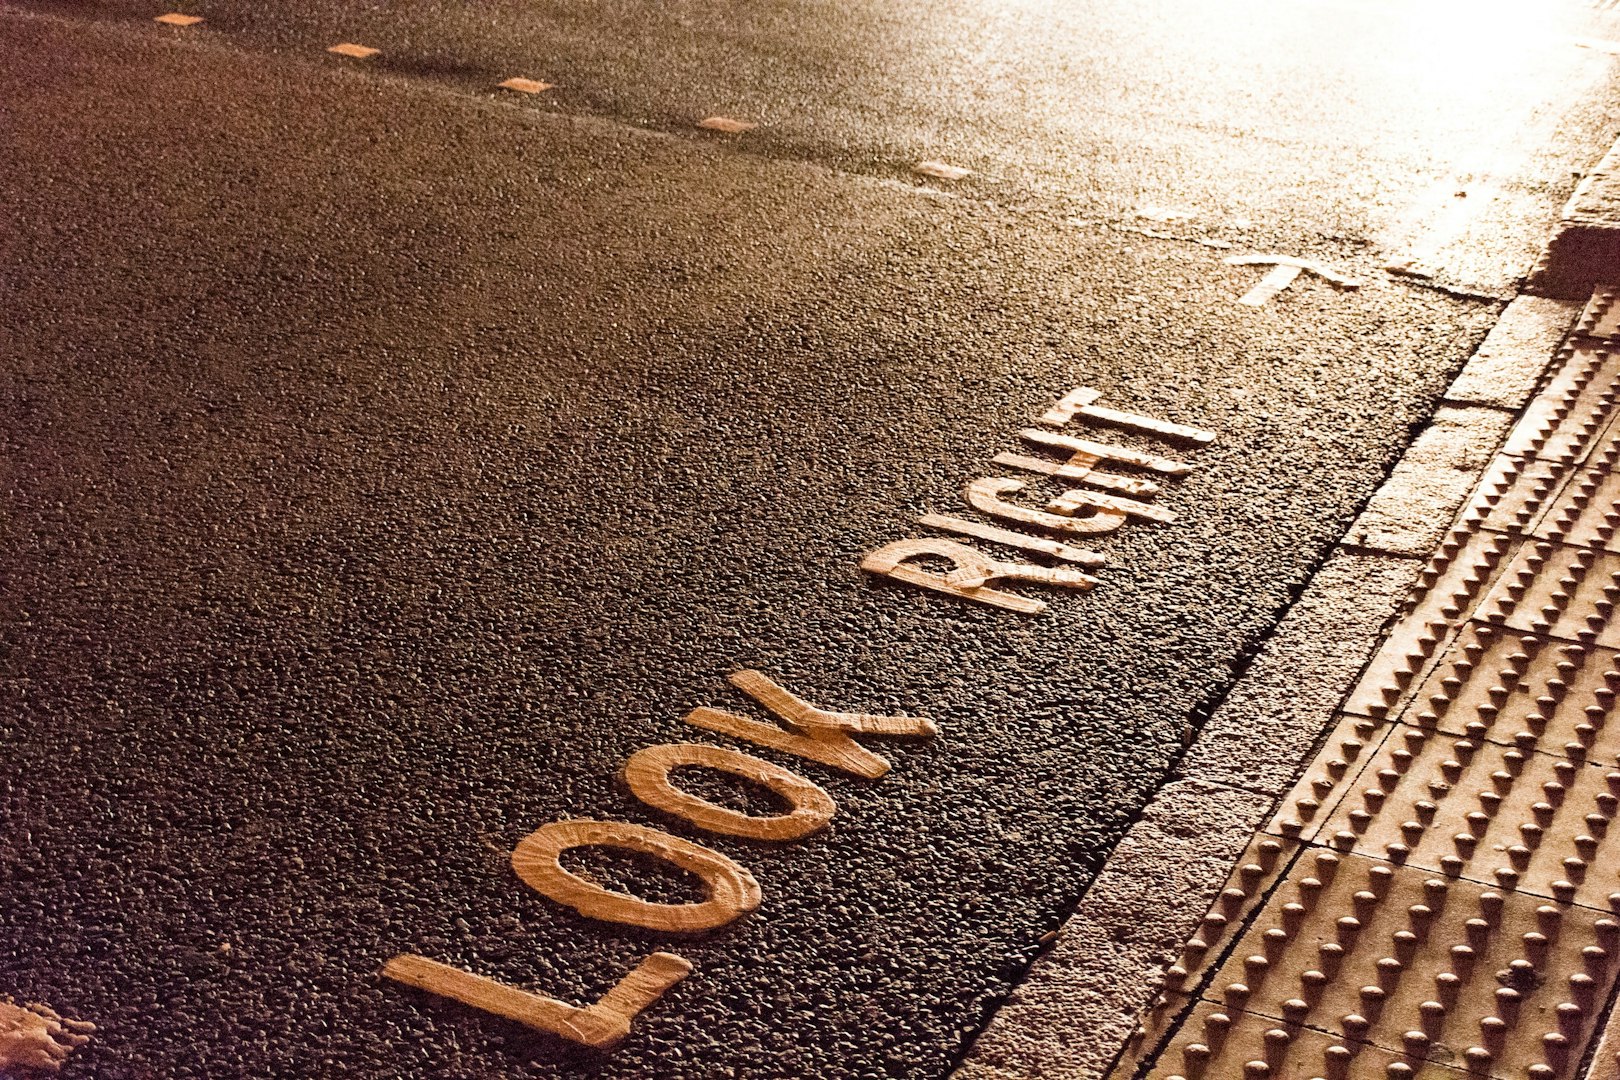 a close up of a street sign on the ground